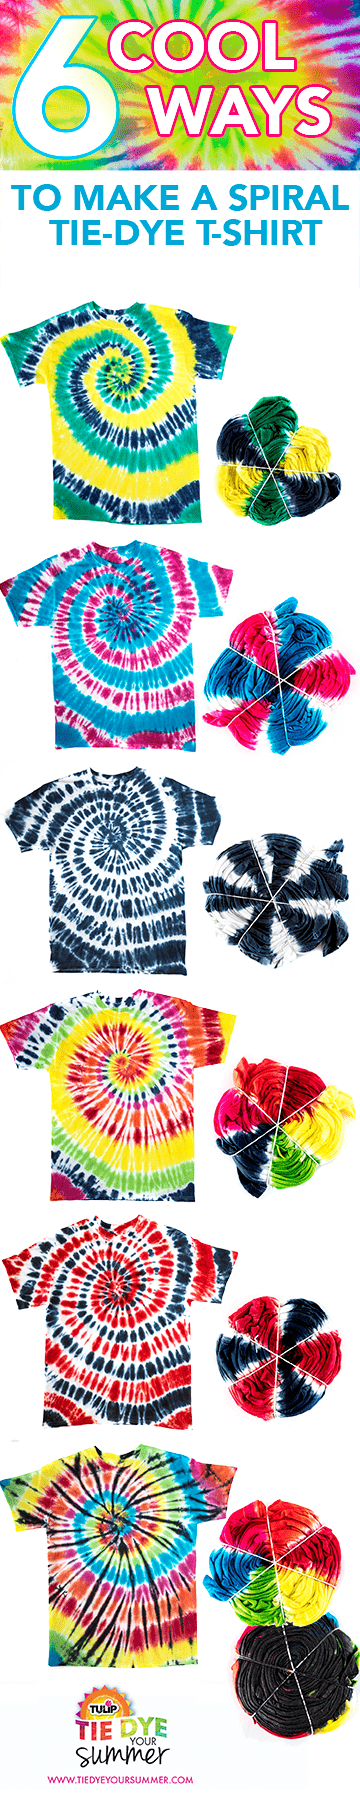 Spiral Tie-Dye Technique Choose your favorite color combos for easy spiral tie dye! #howtospiraltiedye #spiraltiedye #tiedyespiral #DIYtiedye #tuliptiedye #tiedyeyoursummer #TDYS